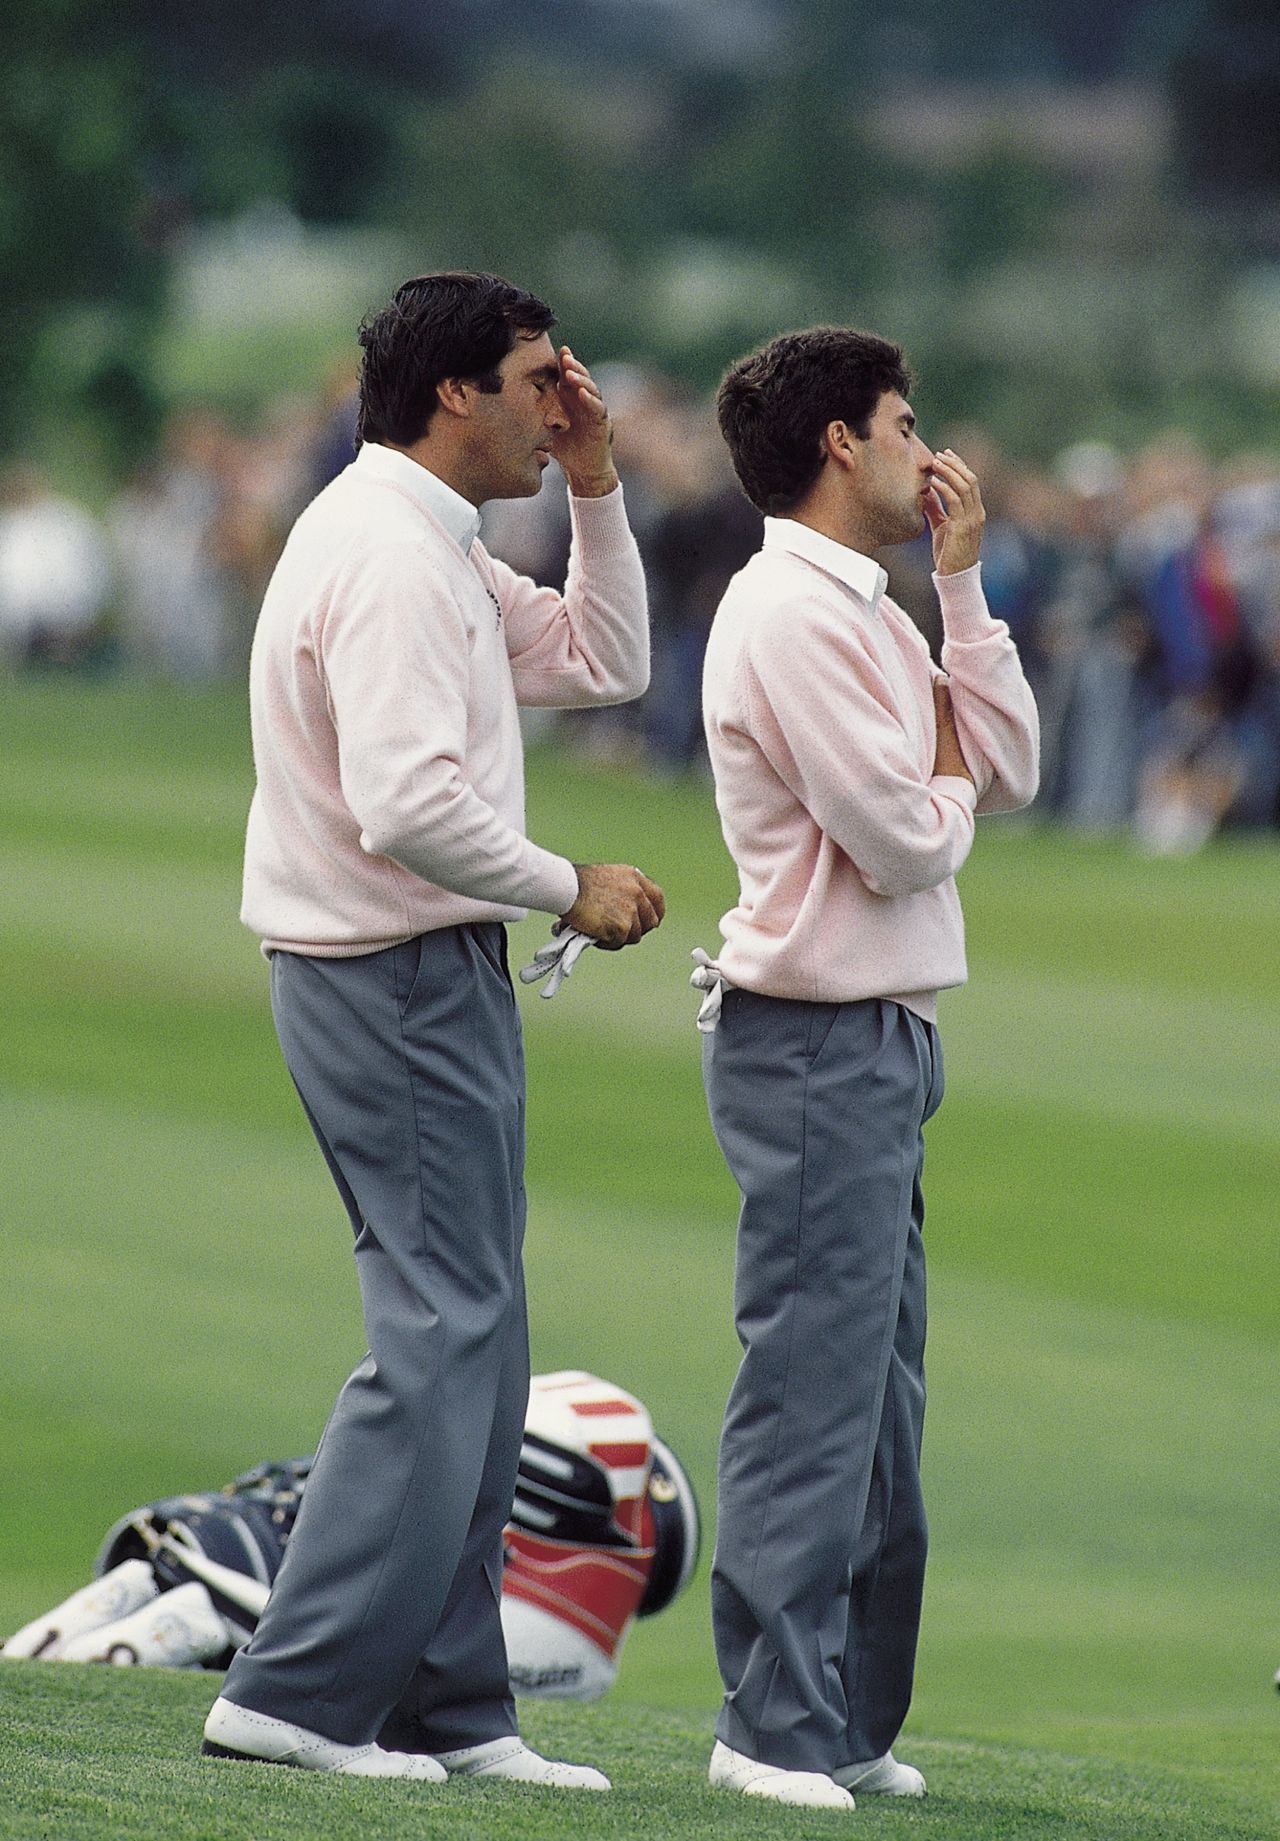 The Spanish pair were reunited for the 1989 match at the Belfry. Despite their pained expressions in this picture, Europe once again retained the trophy after a 14-14 draw.